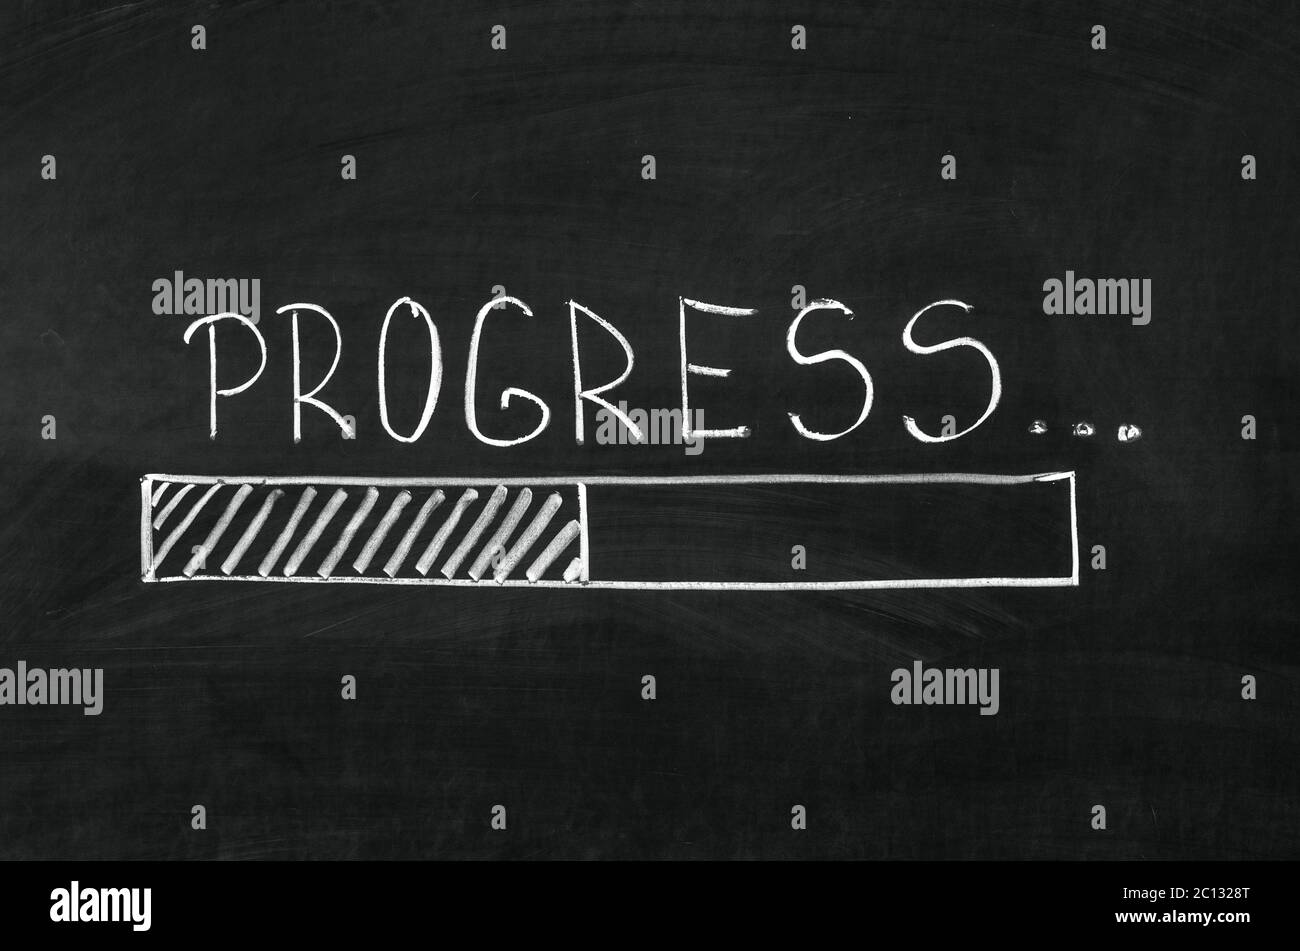 Progress handwritten with white chalk on a blackboard and drawing download bar Stock Photo